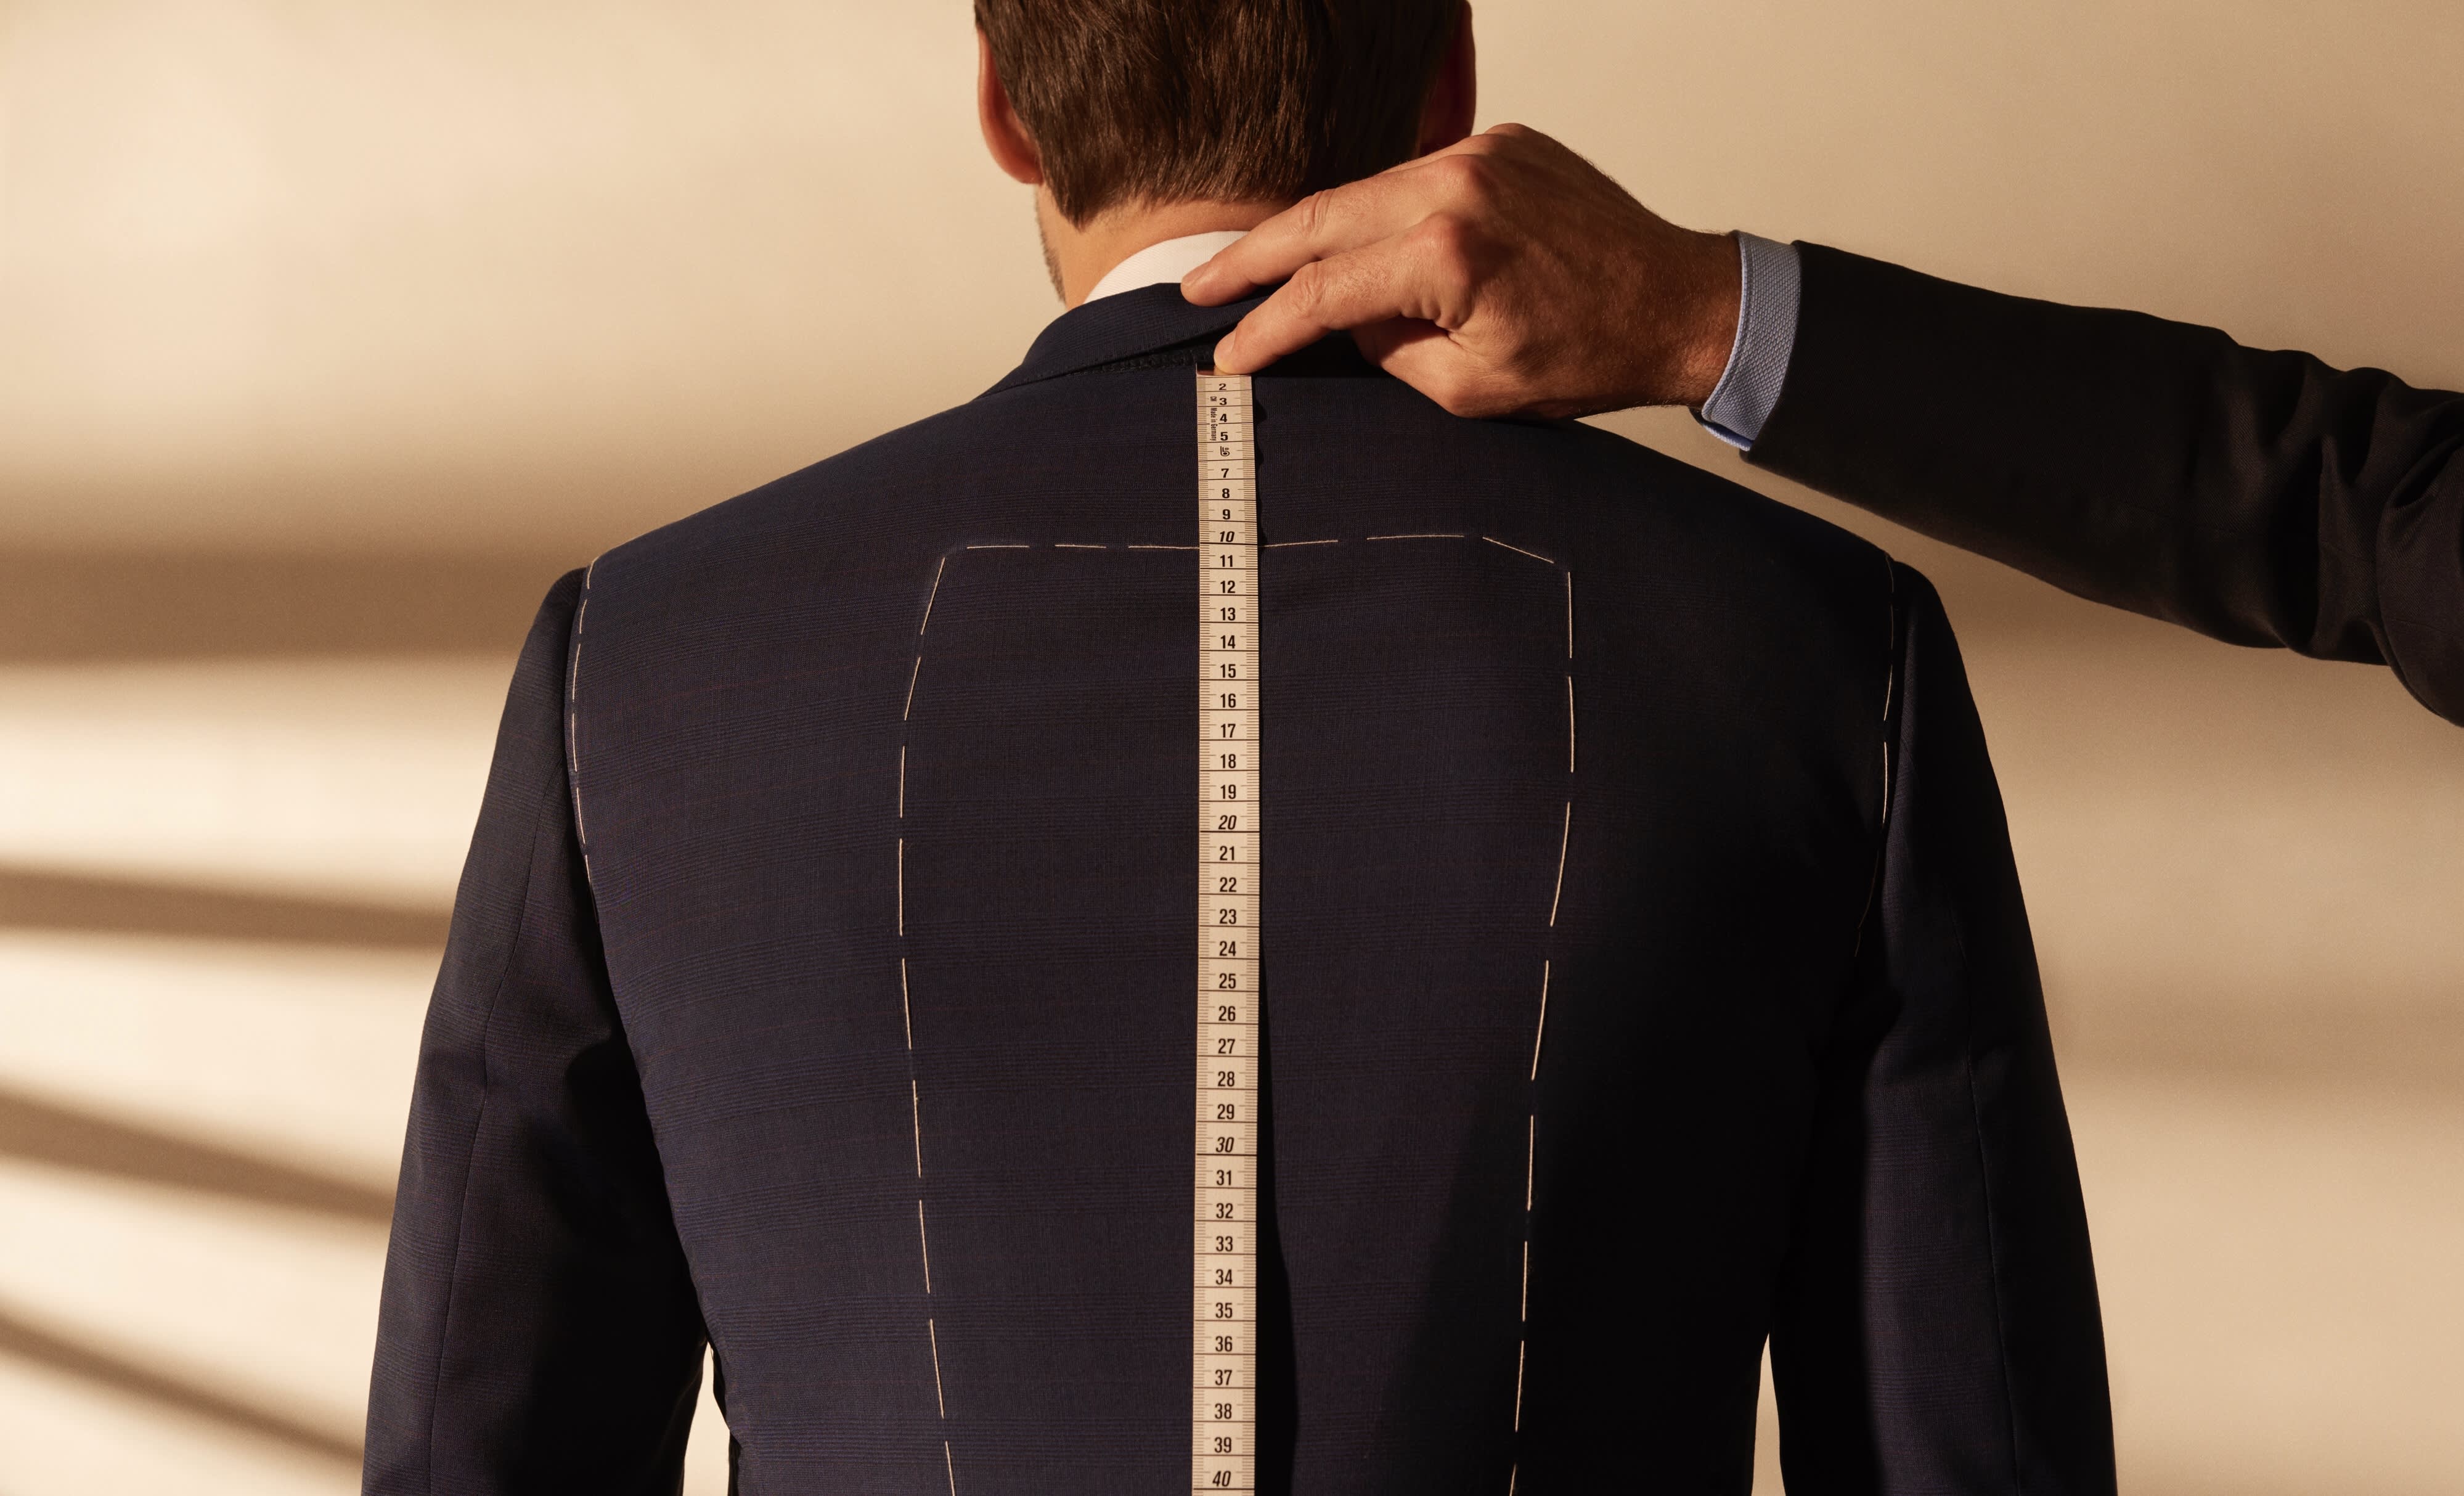 A Brioni master tailor taking the measurements of a client